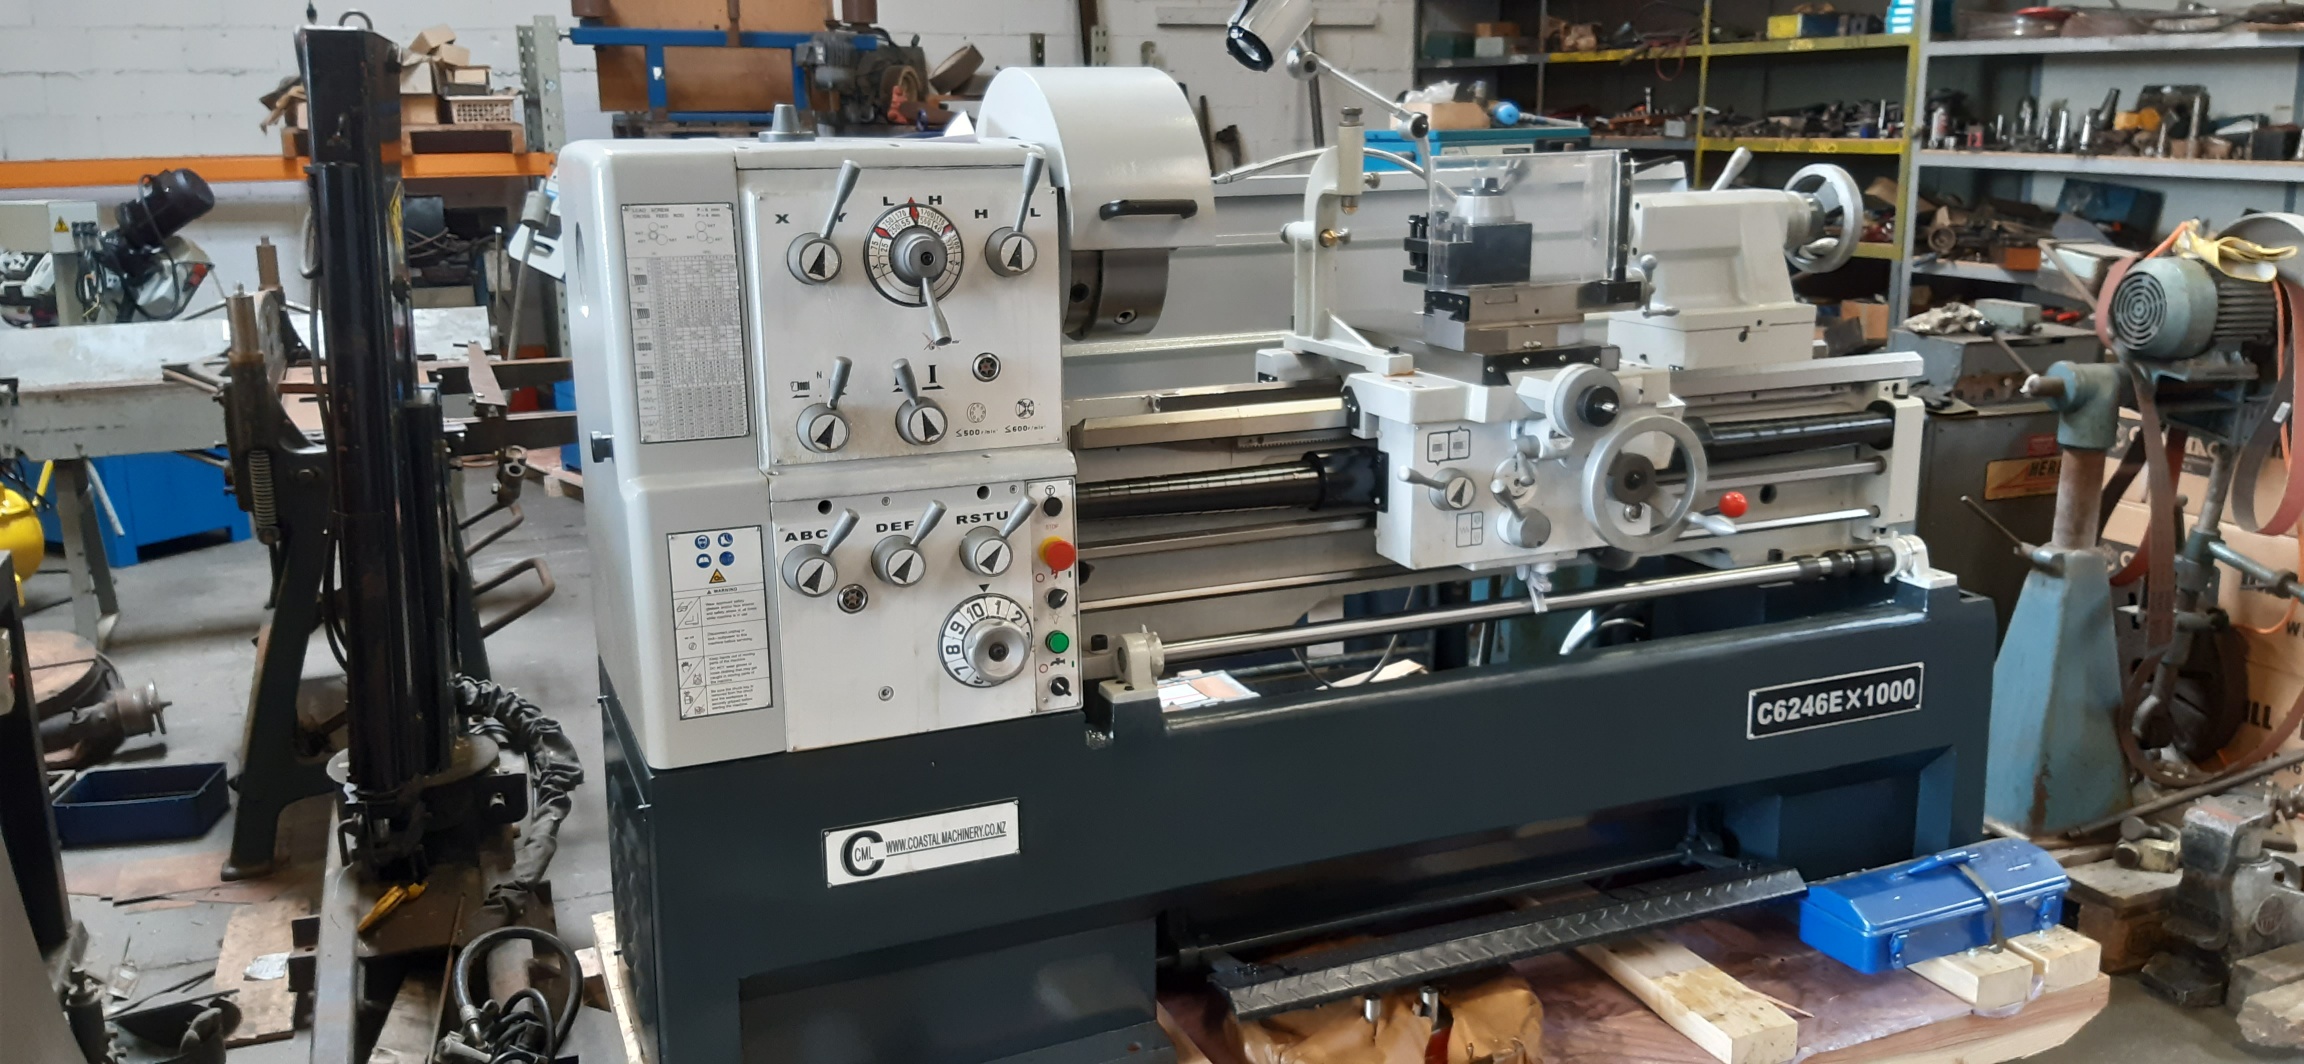 Lathe CML C6246/1000 3 phase (new) 80mm spindle, 1000 B/centres 460mm swing 